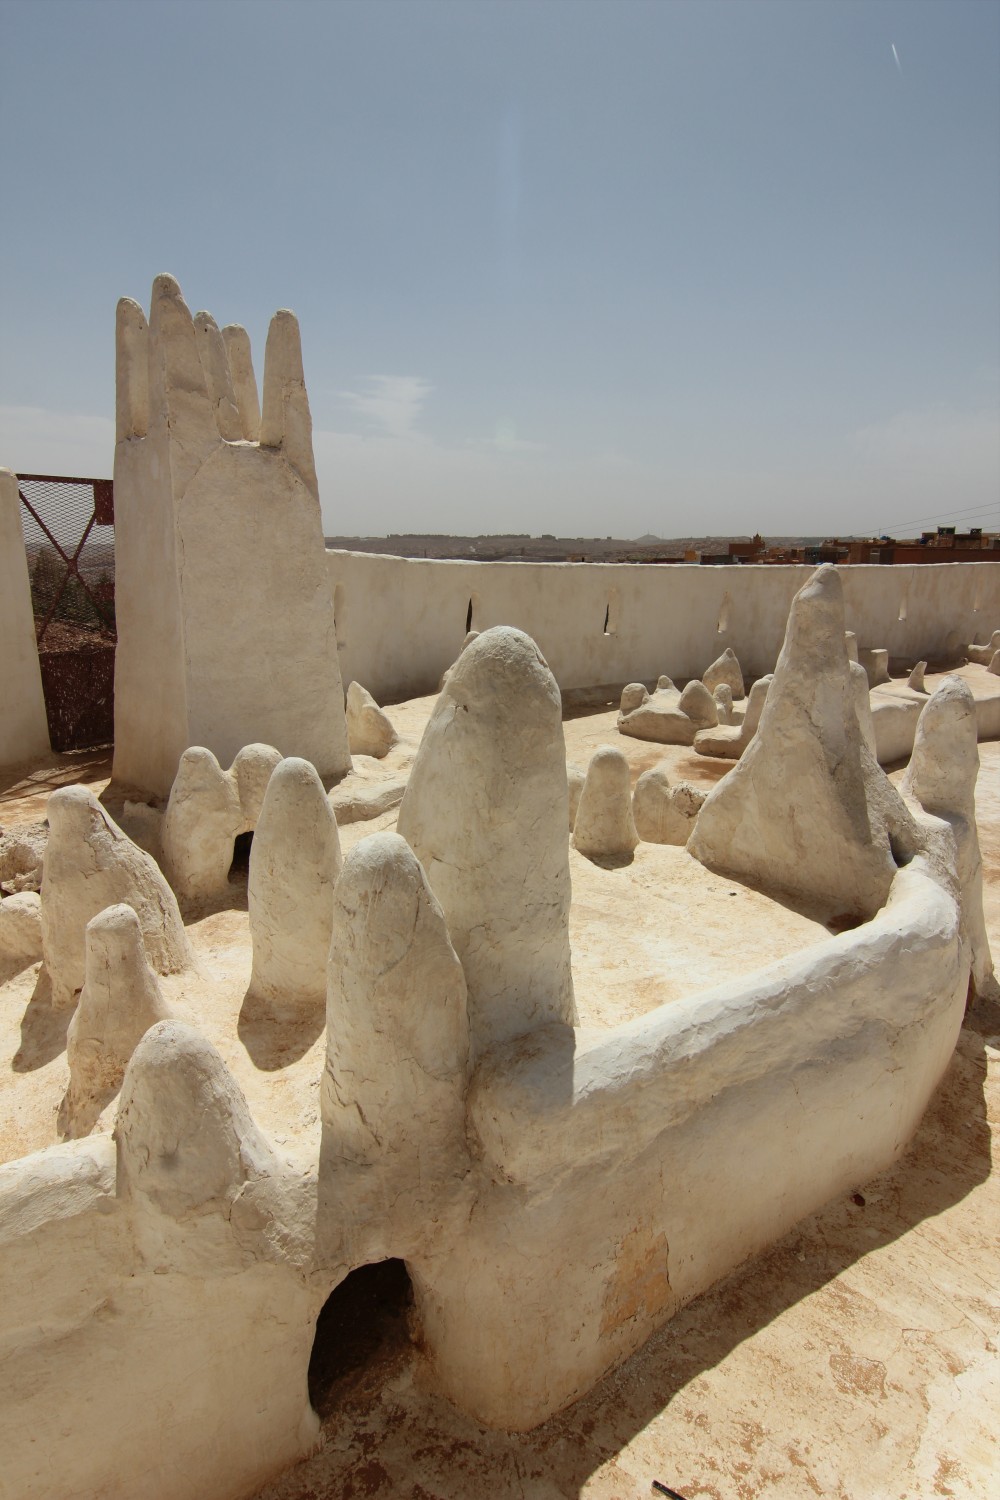 Mélika, downward-looking view of the tomb of Sidi Aïssa, showing white lime gravestone